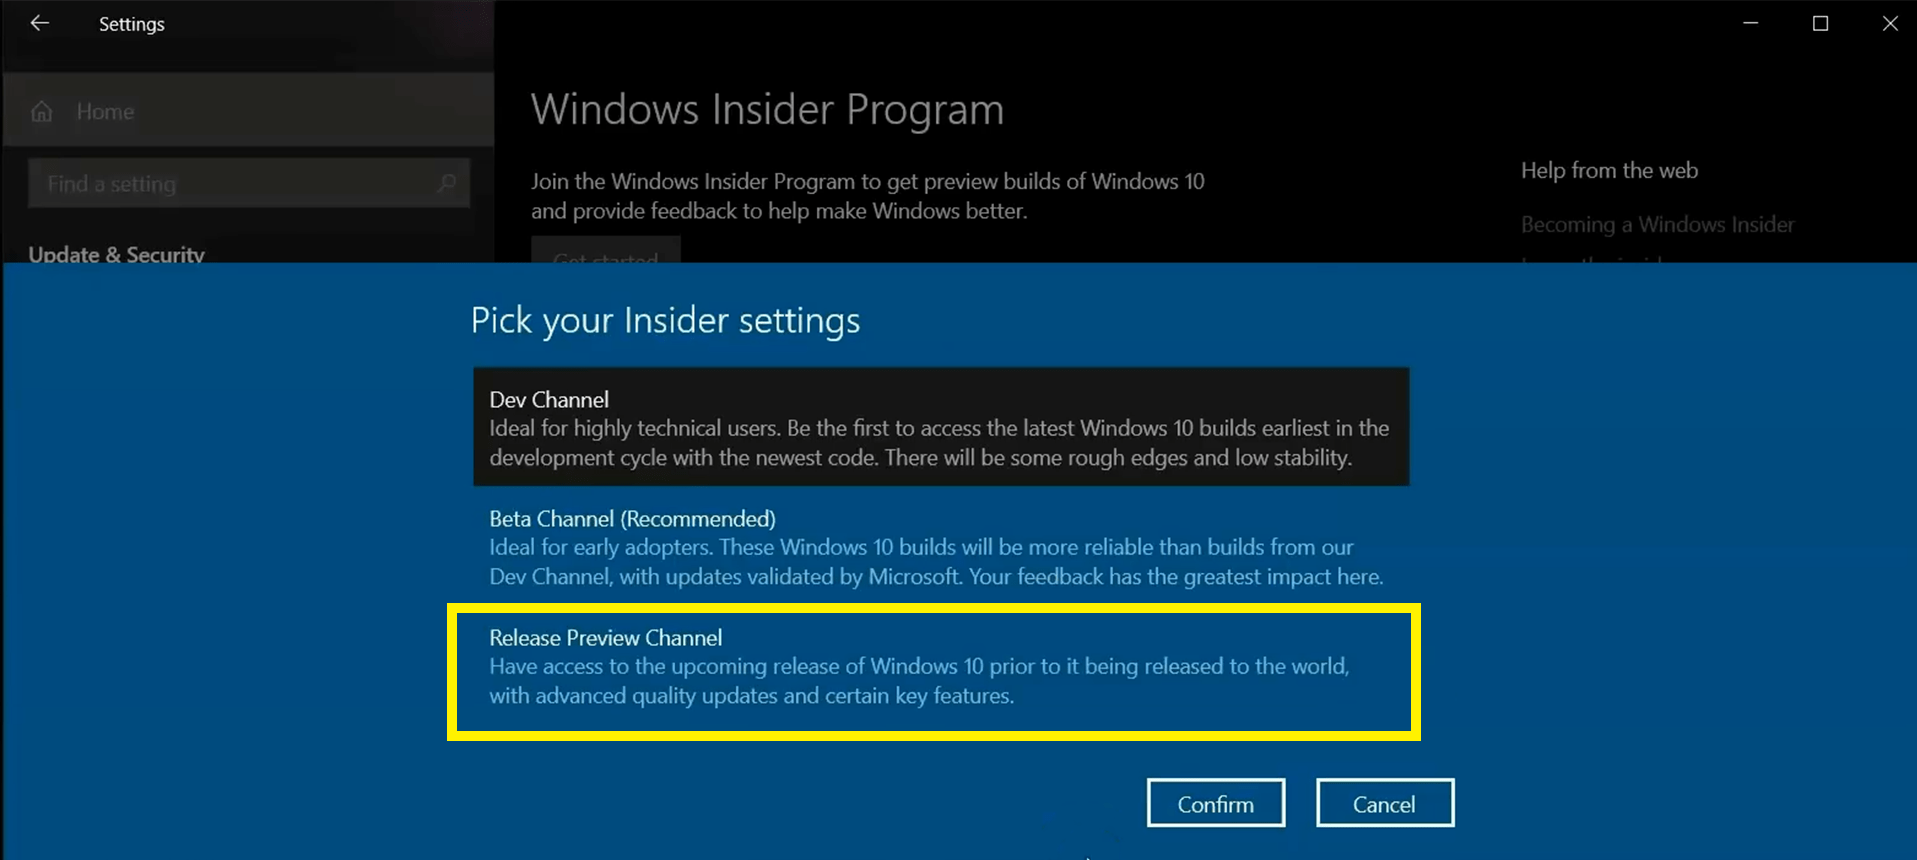 How to update and install windows 10 20H2?